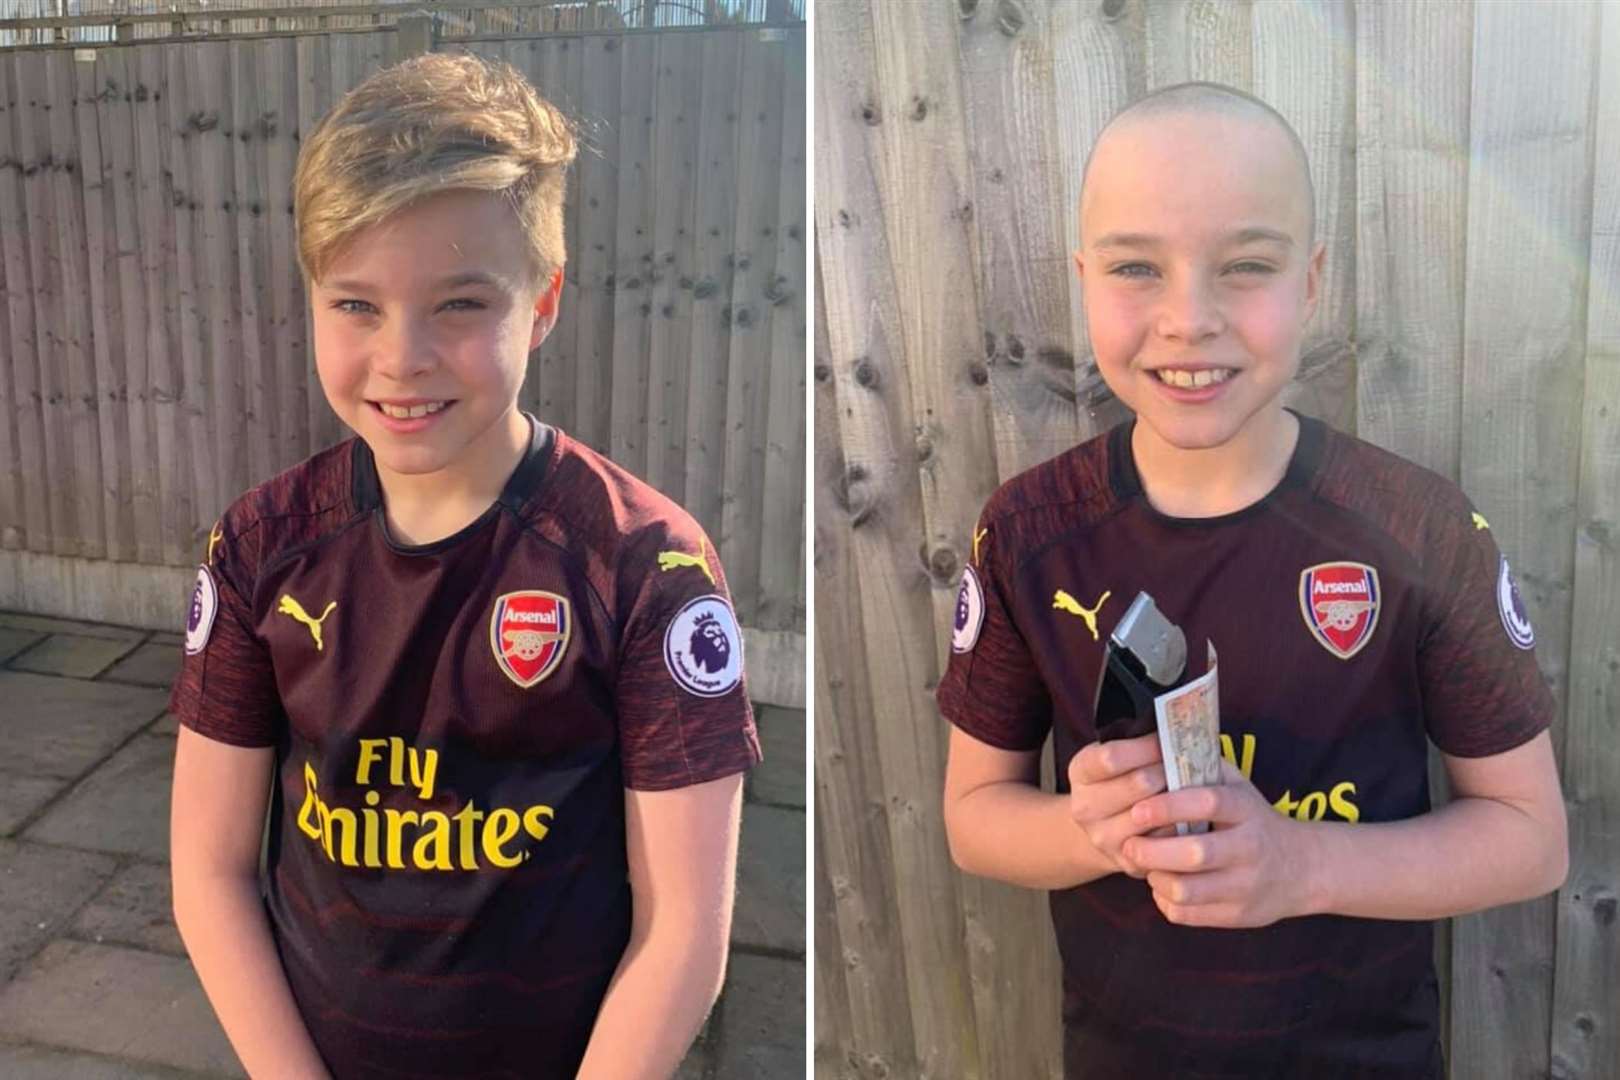 Ashton Lusted, 10, from Sittingbourne shaved his head for charity